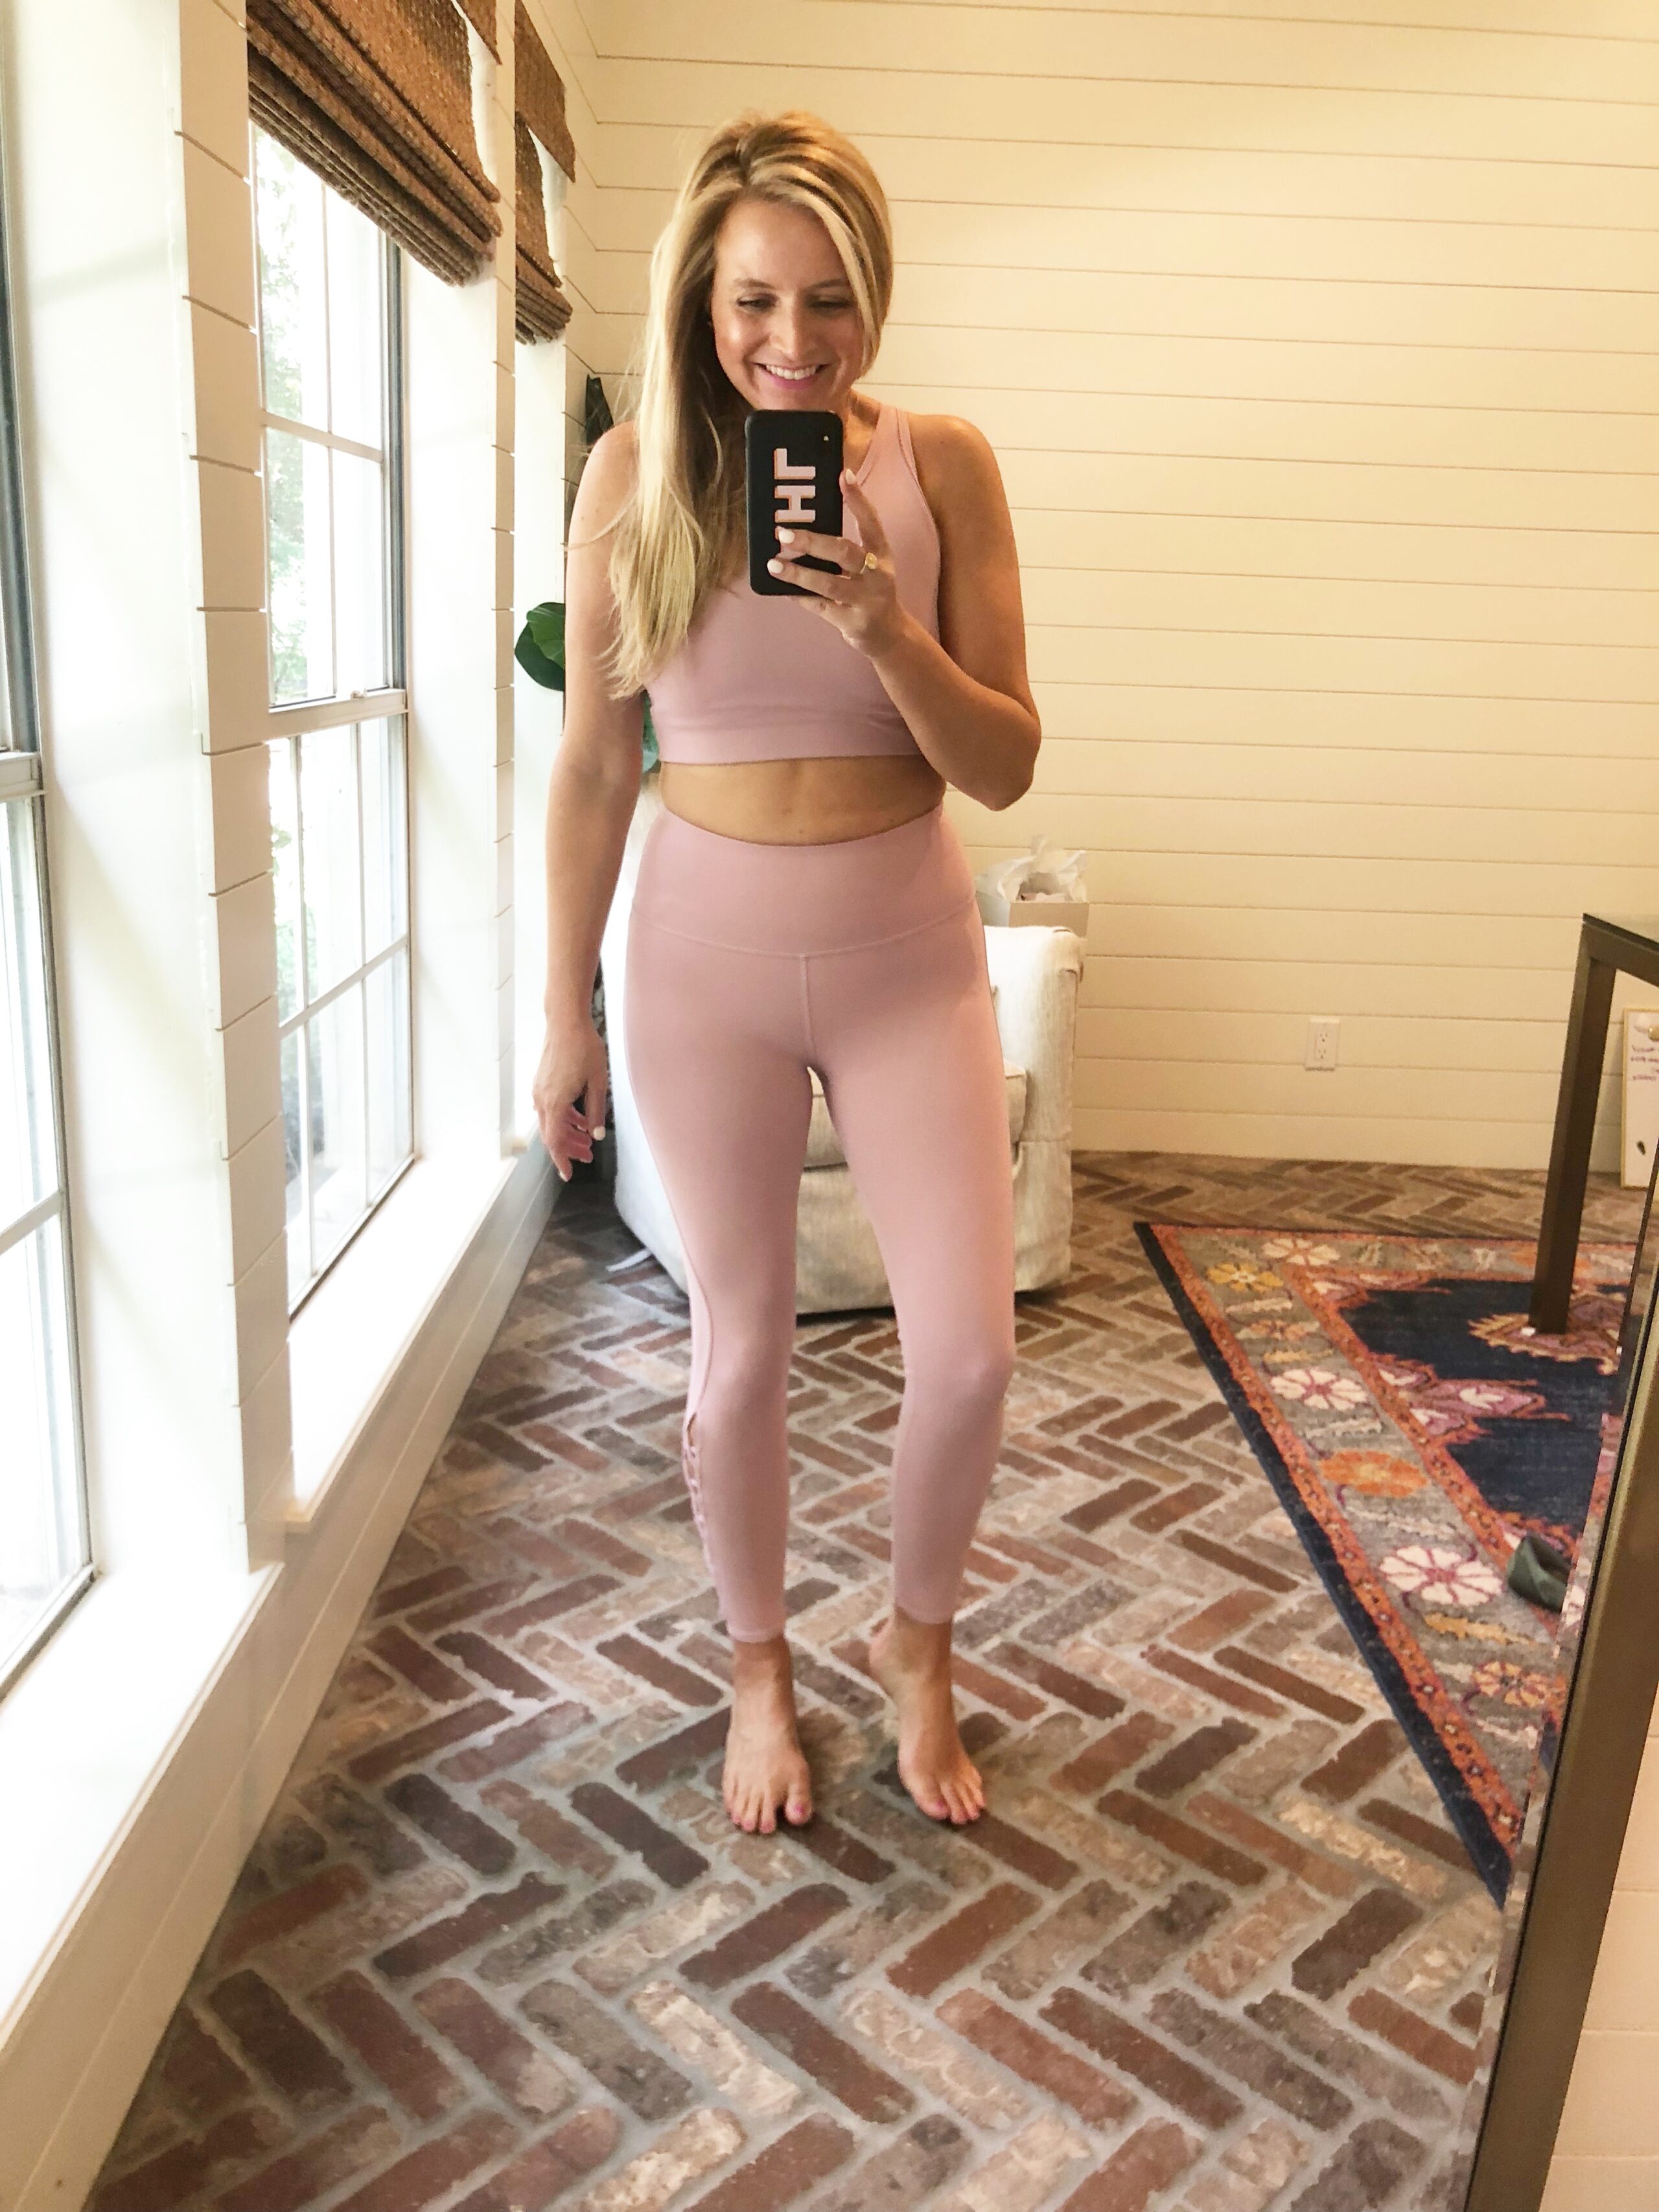 BBG results and Amazon favorites workout wear by popular Houston life and style blogger, Fancy Ashley